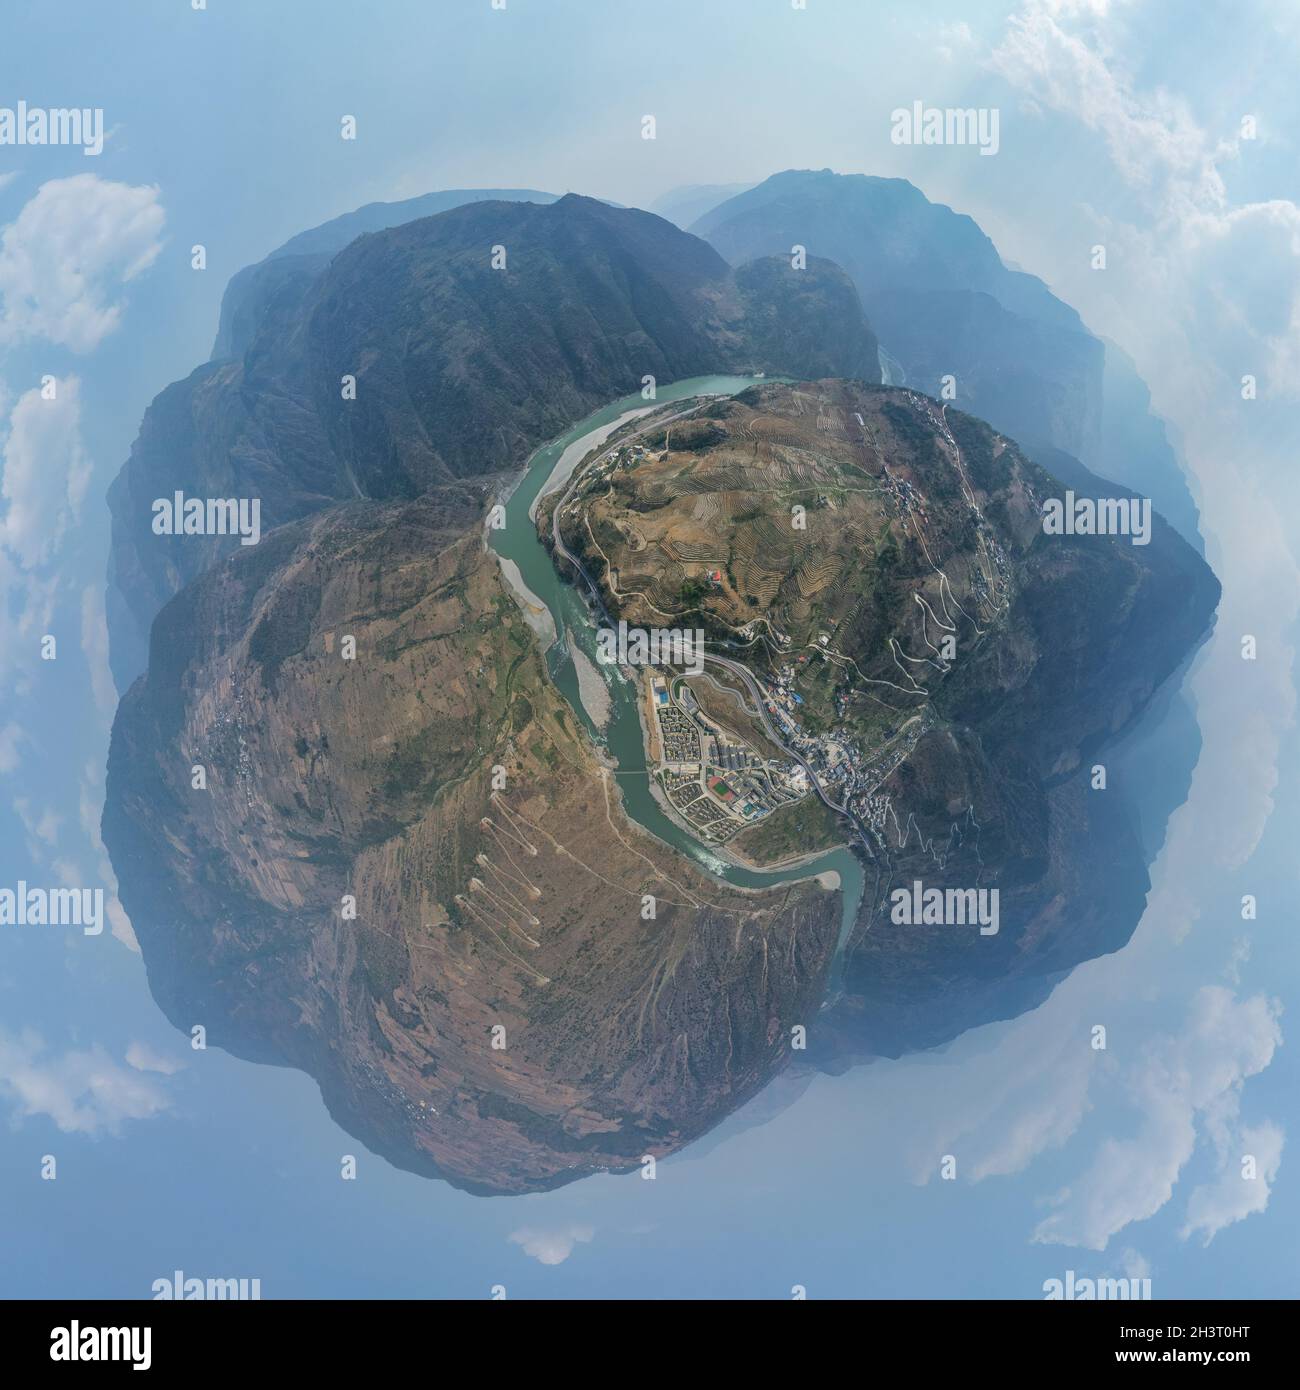 Little planet image of nujiang river landscape Stock Photo